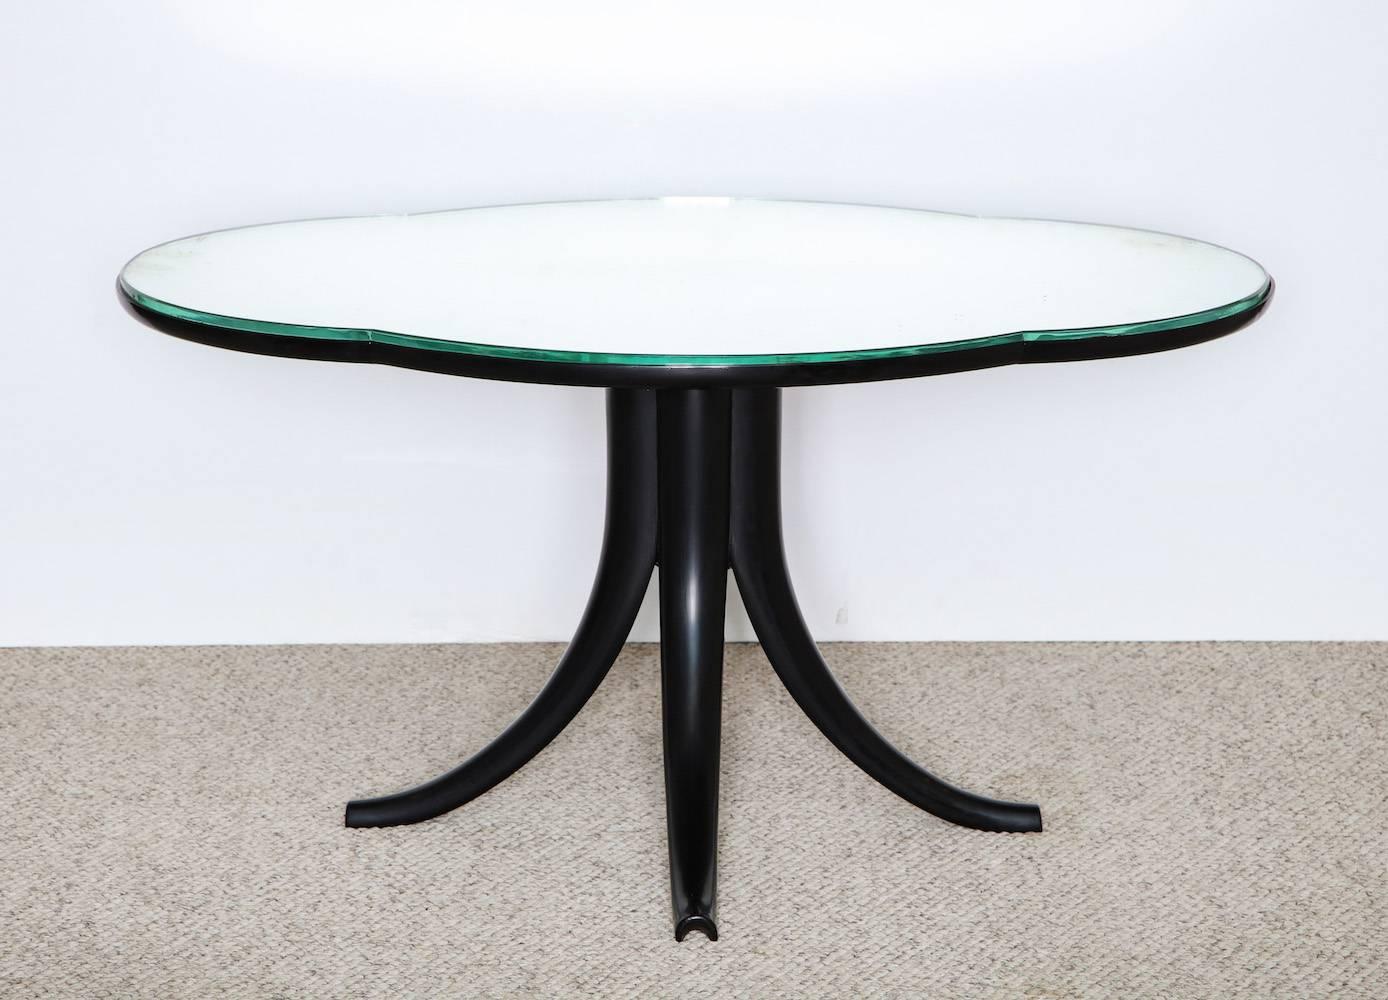 Rare and early cocktail table by Pietro Chiesa for Fontana Arte.
Elegant low table on pedestal base. Cloud-shaped top wood structure with thick mirrored set-in top. All wood elements are ebonized. Very good vintage condition. Wood has been touched